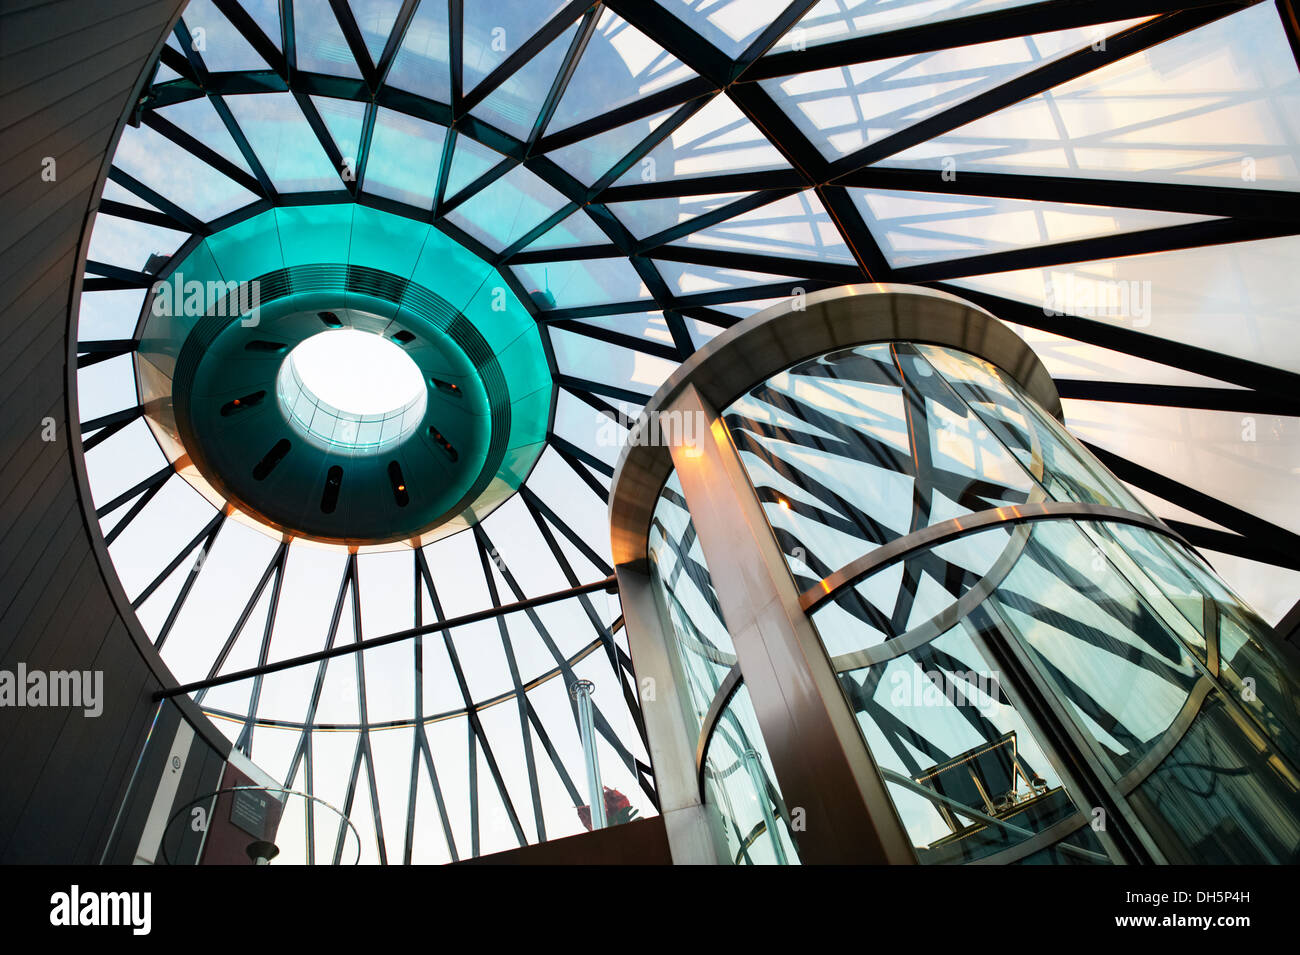 inside the dome of the Gerkin building in the City of London Stock Photo